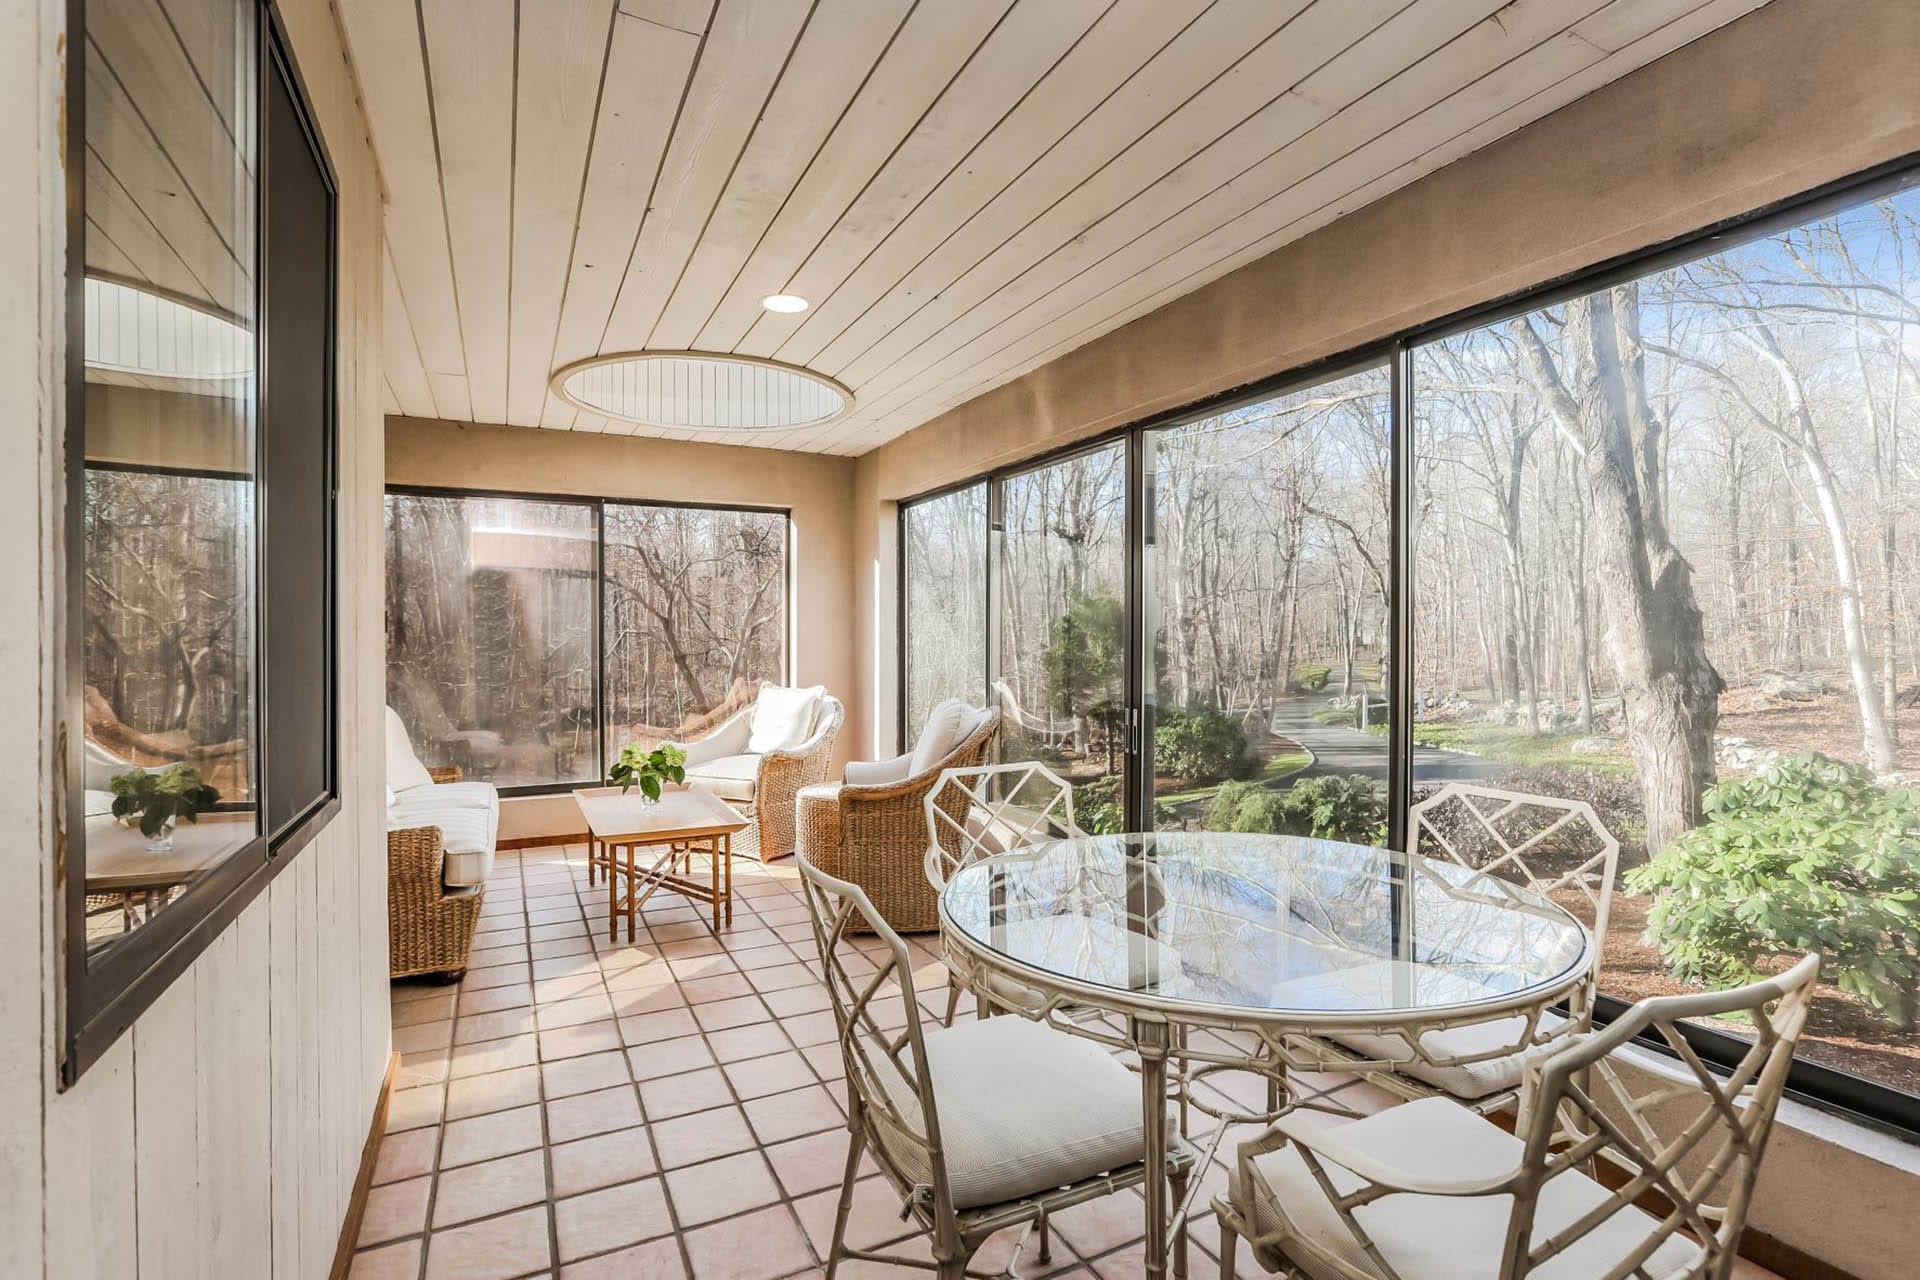 Dining area with a glass tabletop, large wraparound windows, tile floors